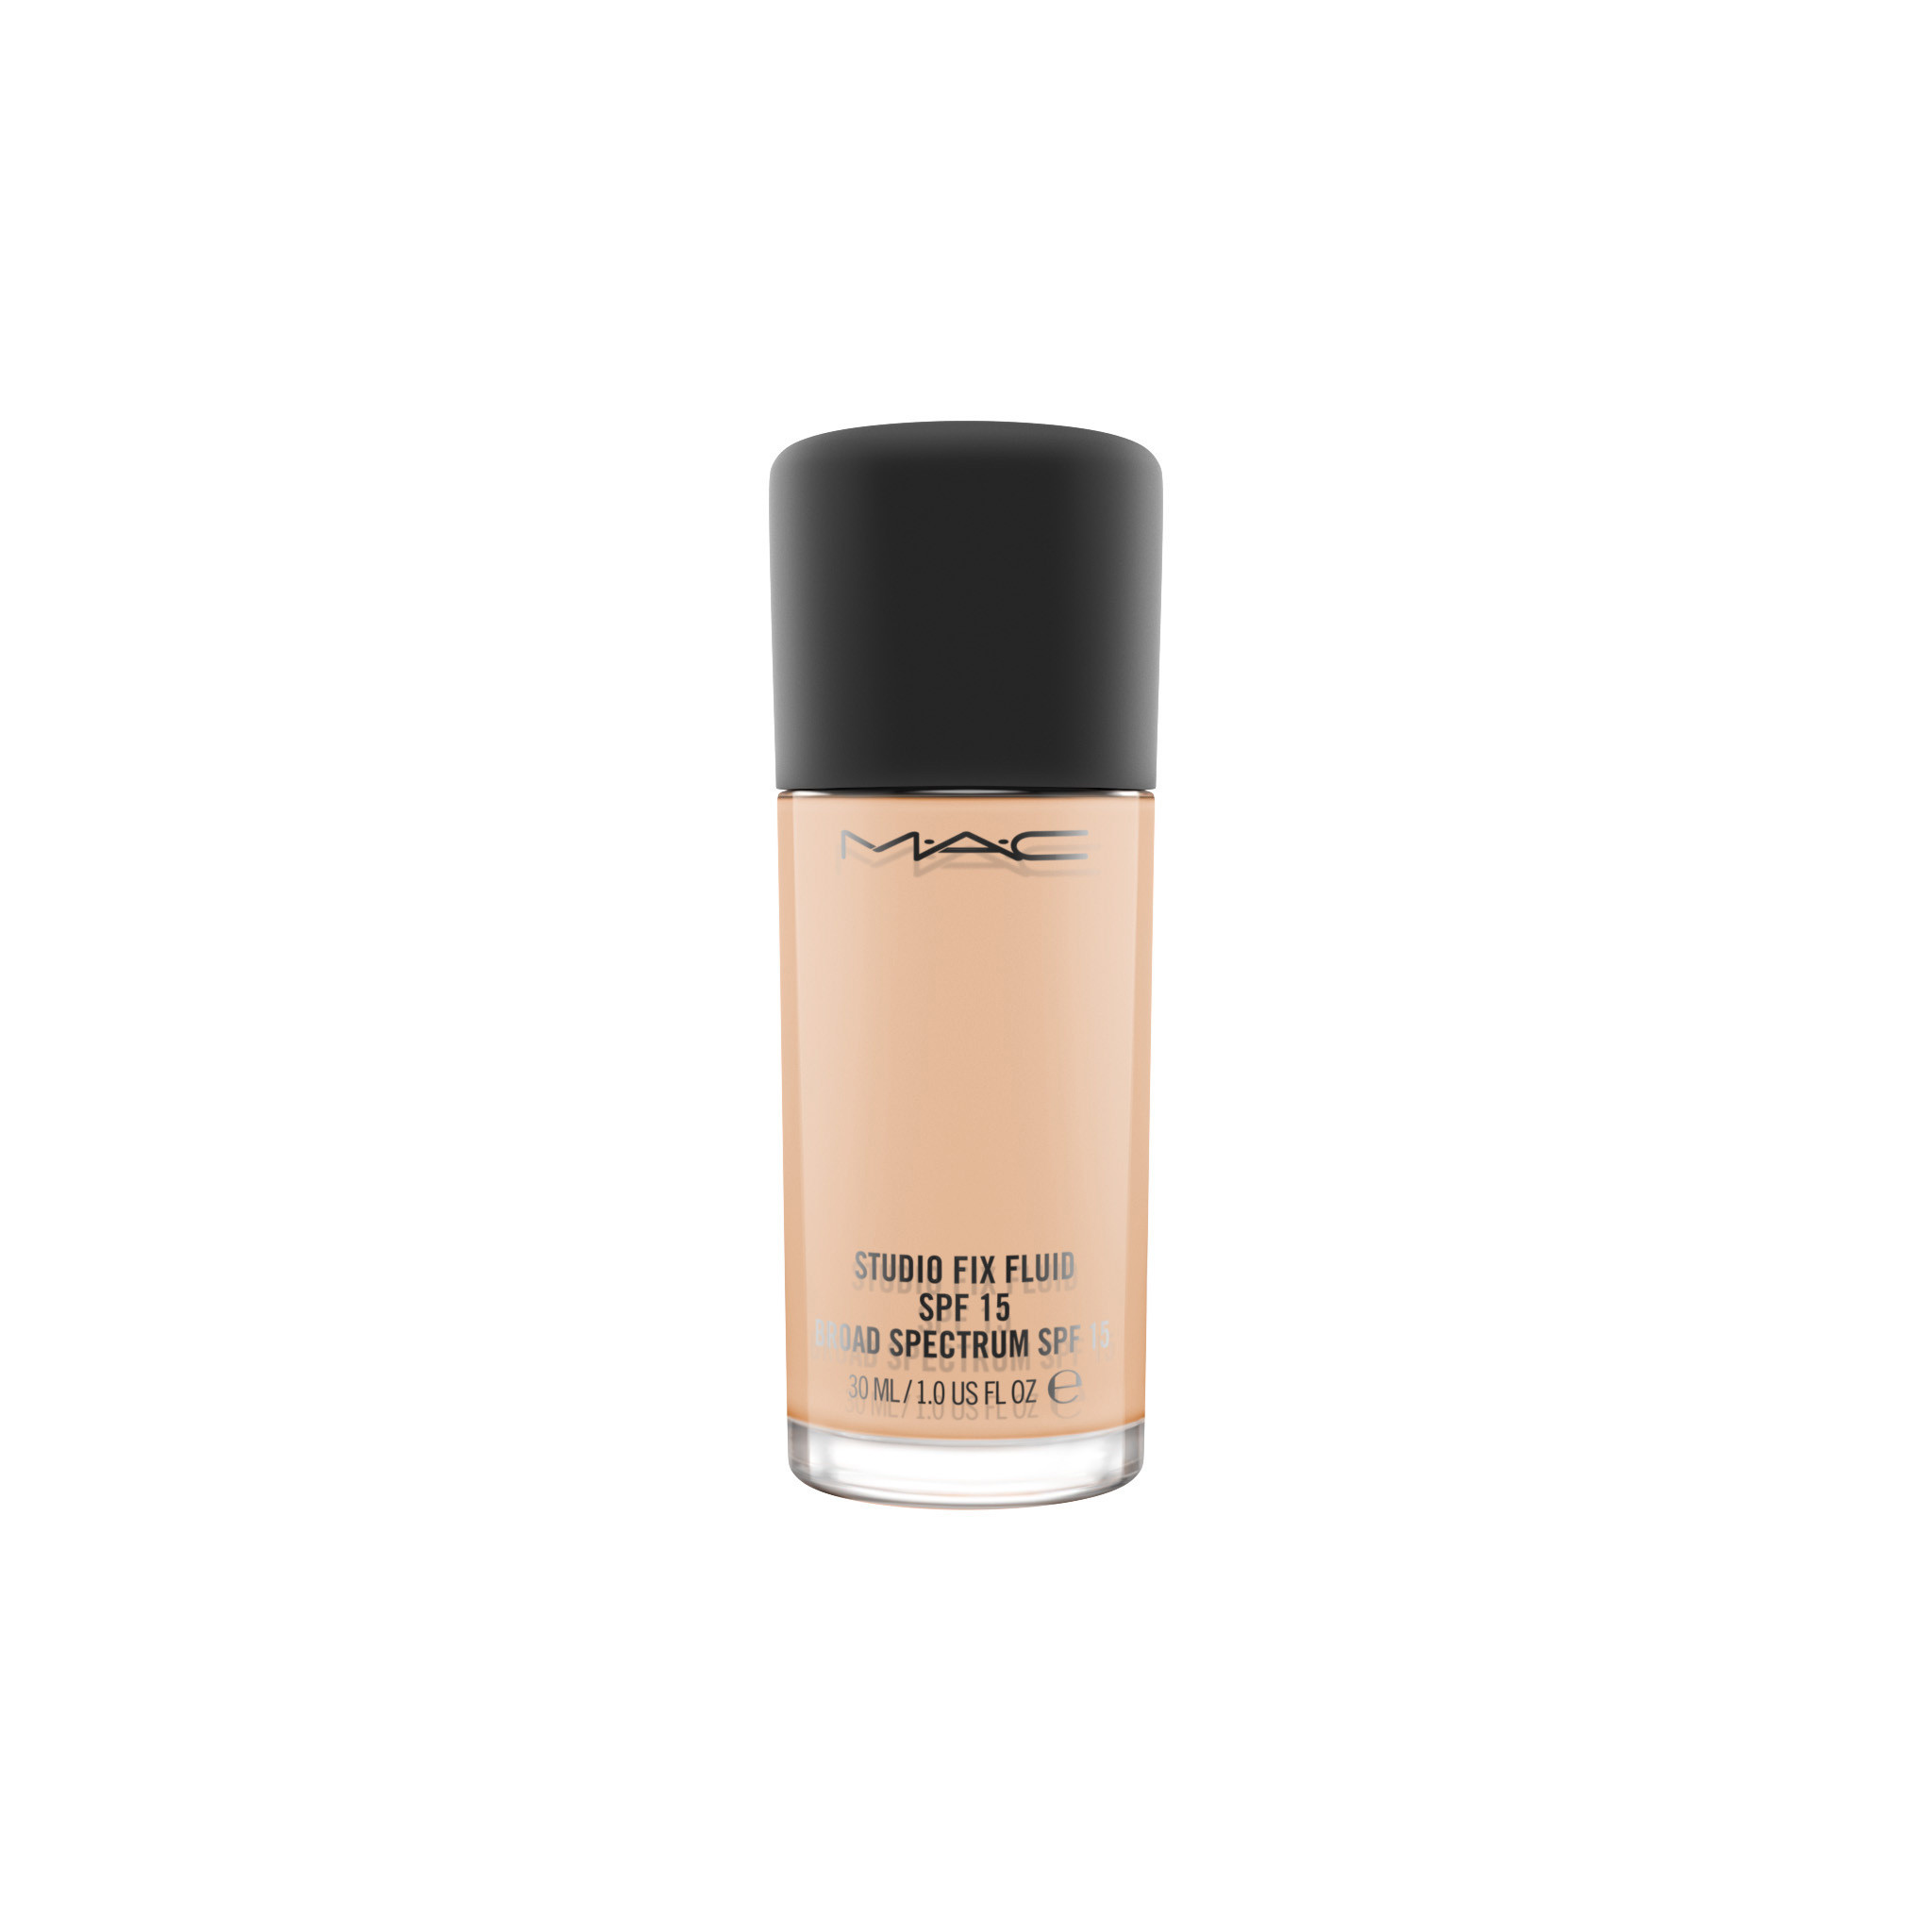 Studio Fix Fluid Foundation Spf15 - NW20, NW20, large image number 0